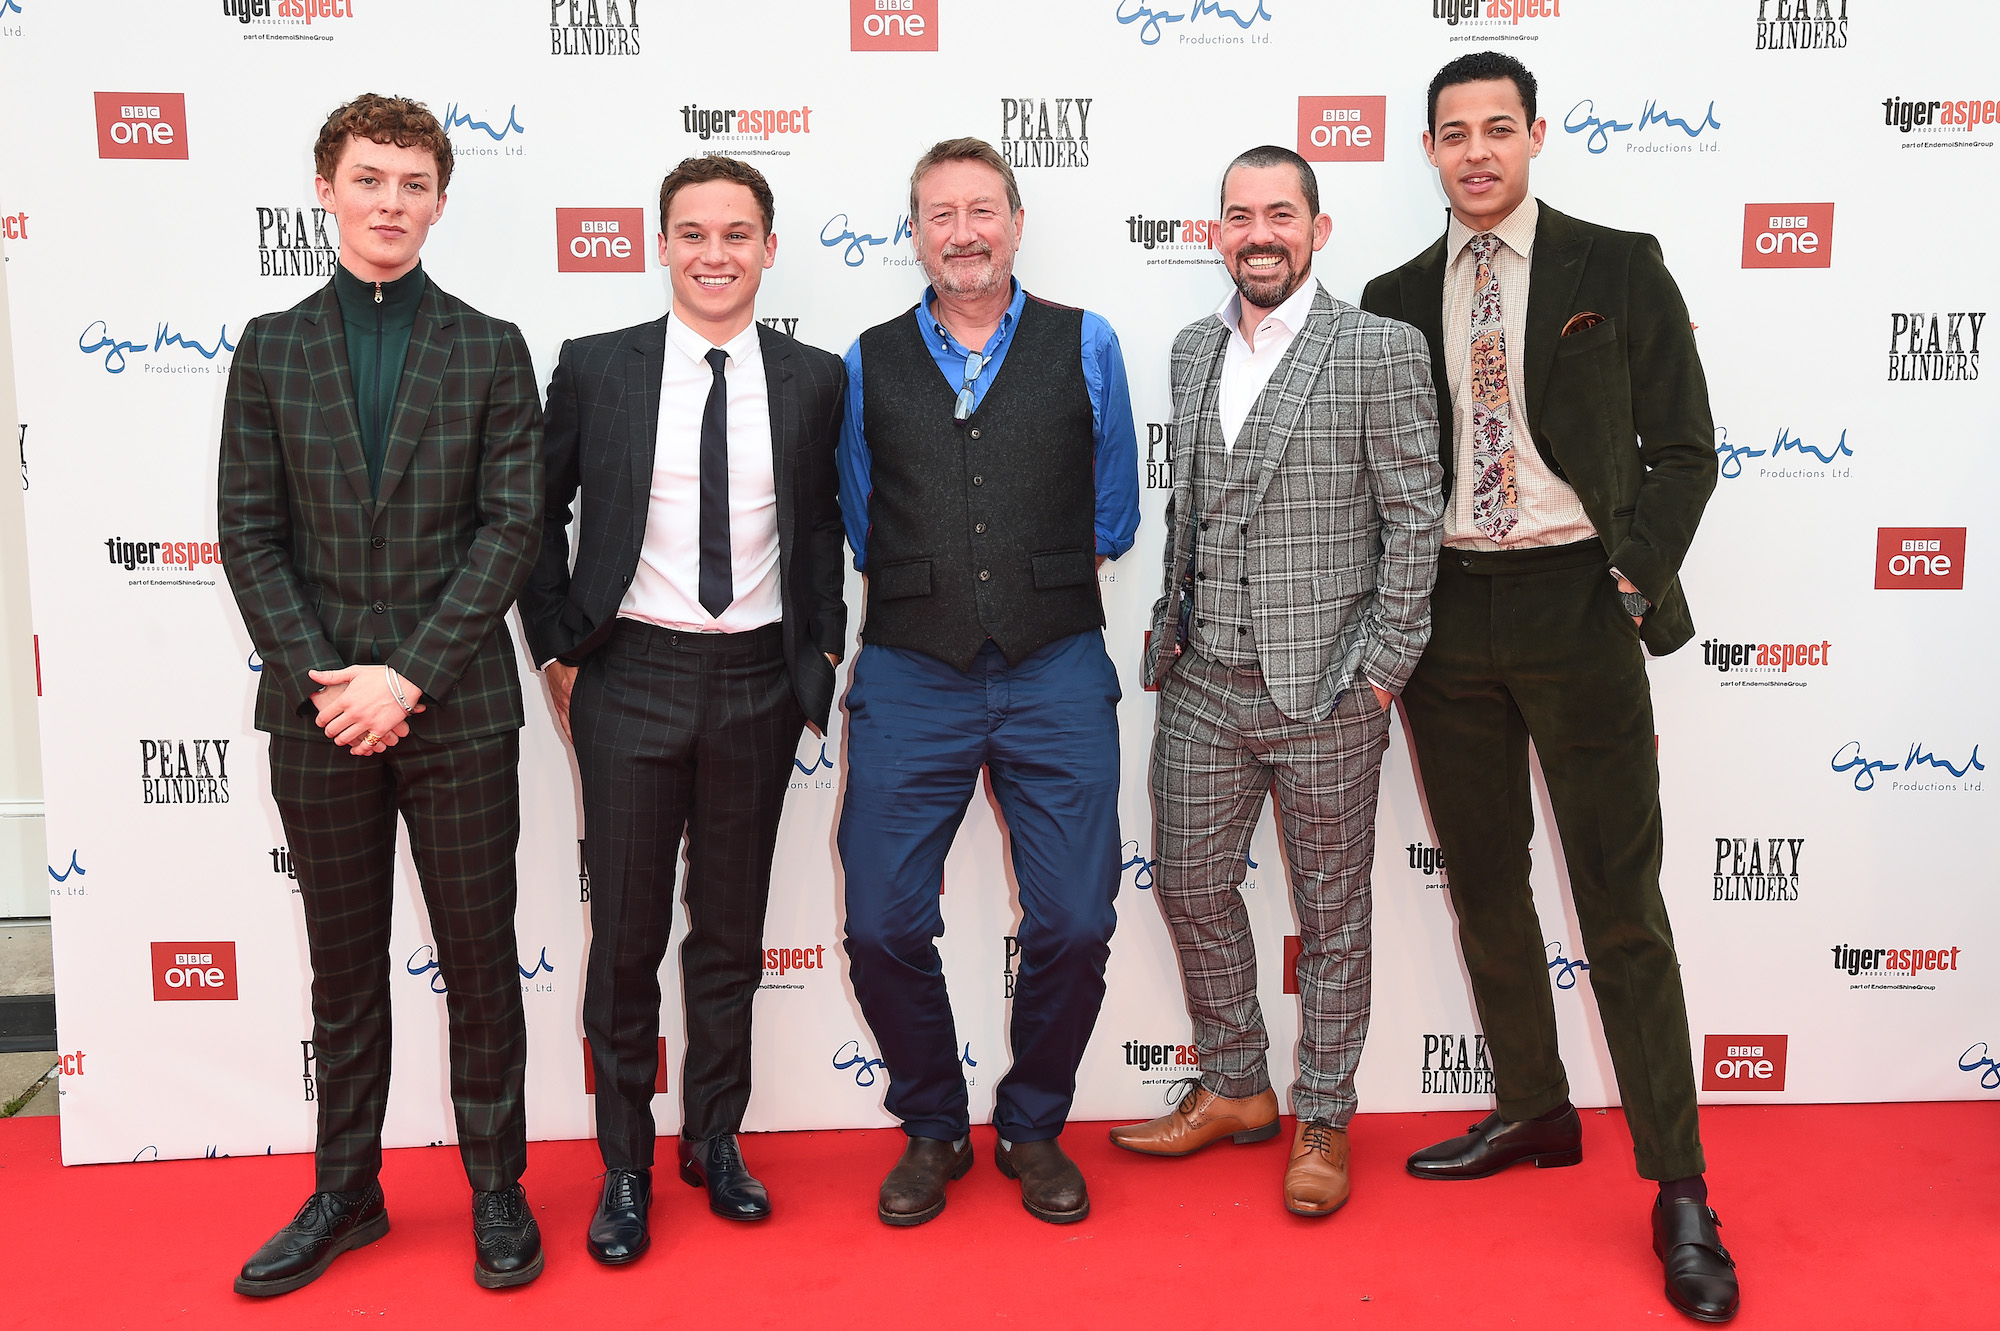 Steven Knight, creator of 'Peaky Blinders' Season 6, in the middle of actors Harry Kirton, Finn Cole, Packy Lee, and Daryl McCormack standing for a photo on a red carpet